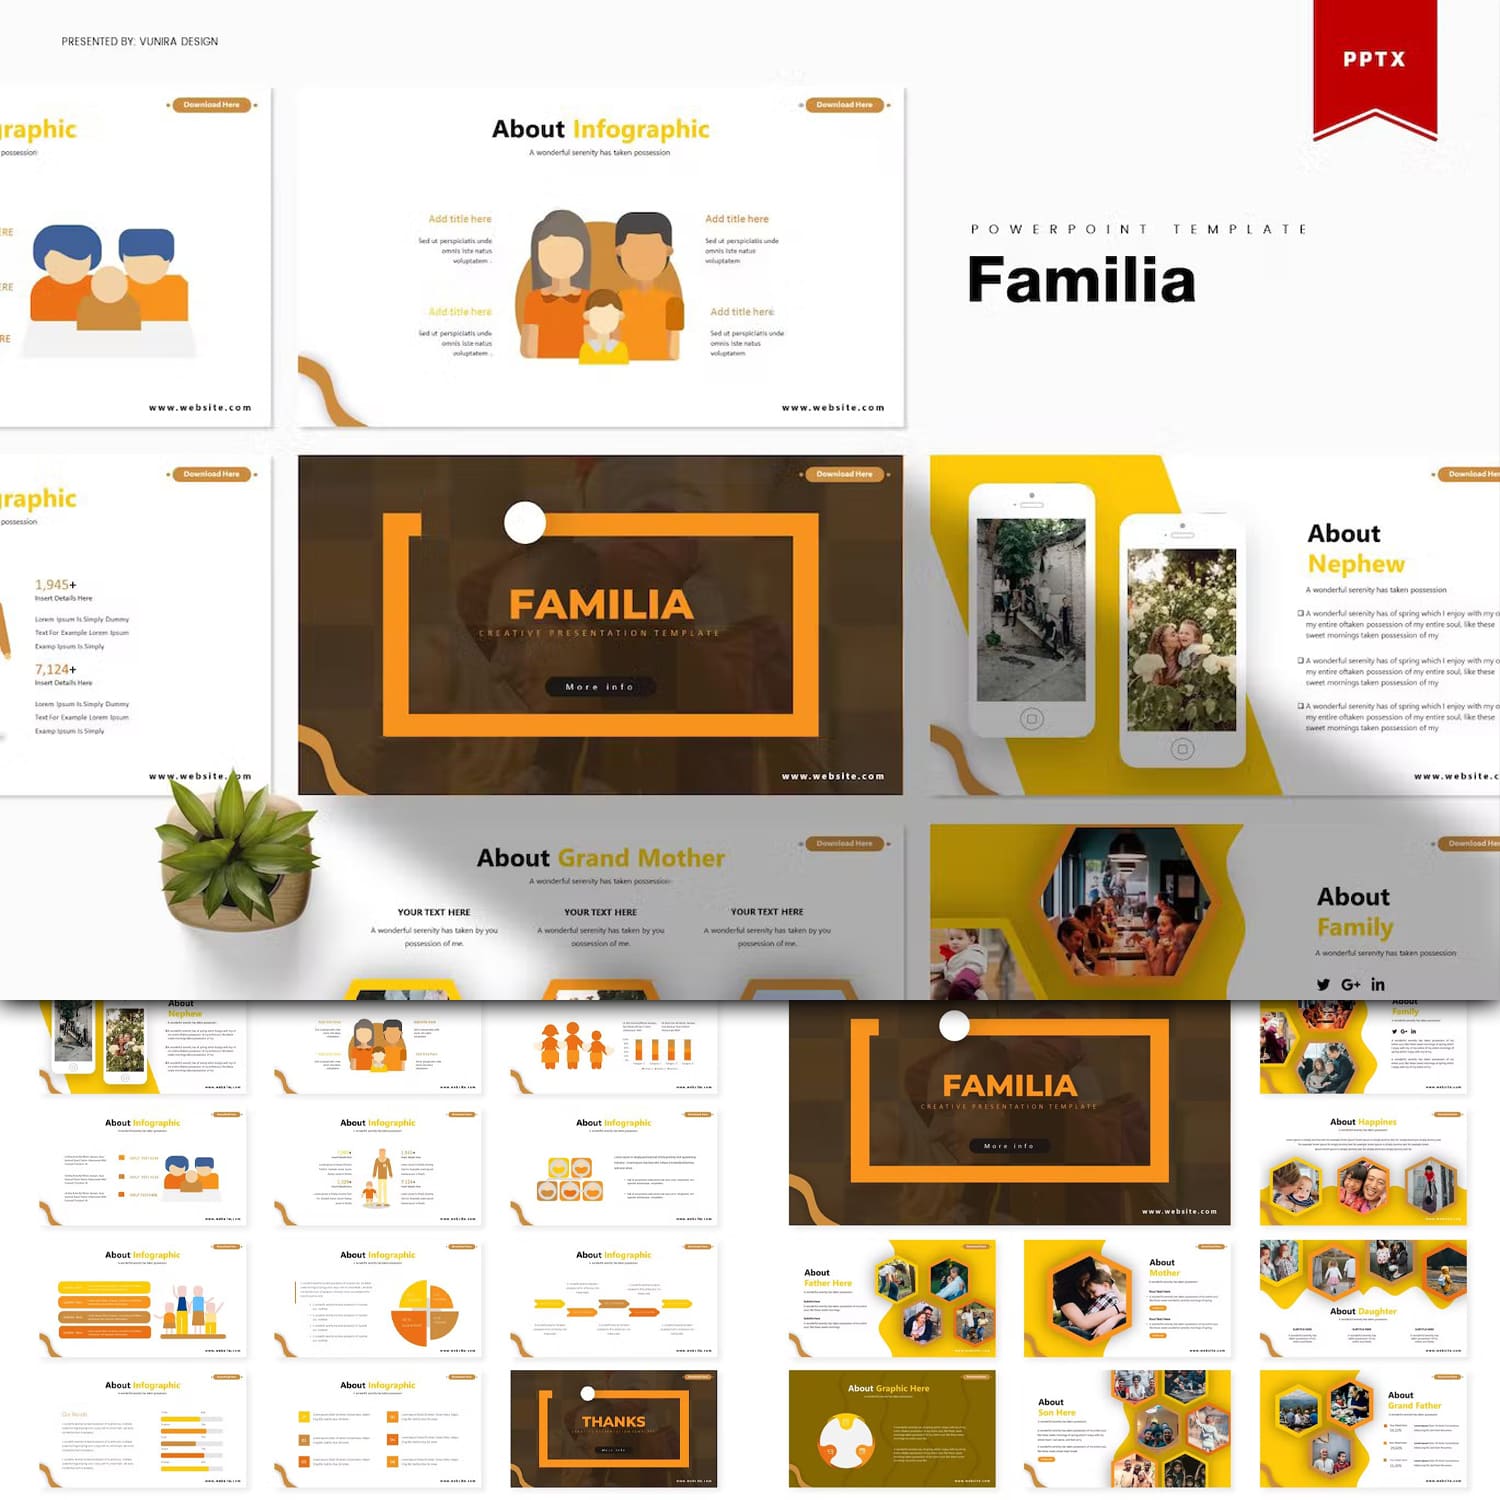 Familia powerpoint template - main image preview.